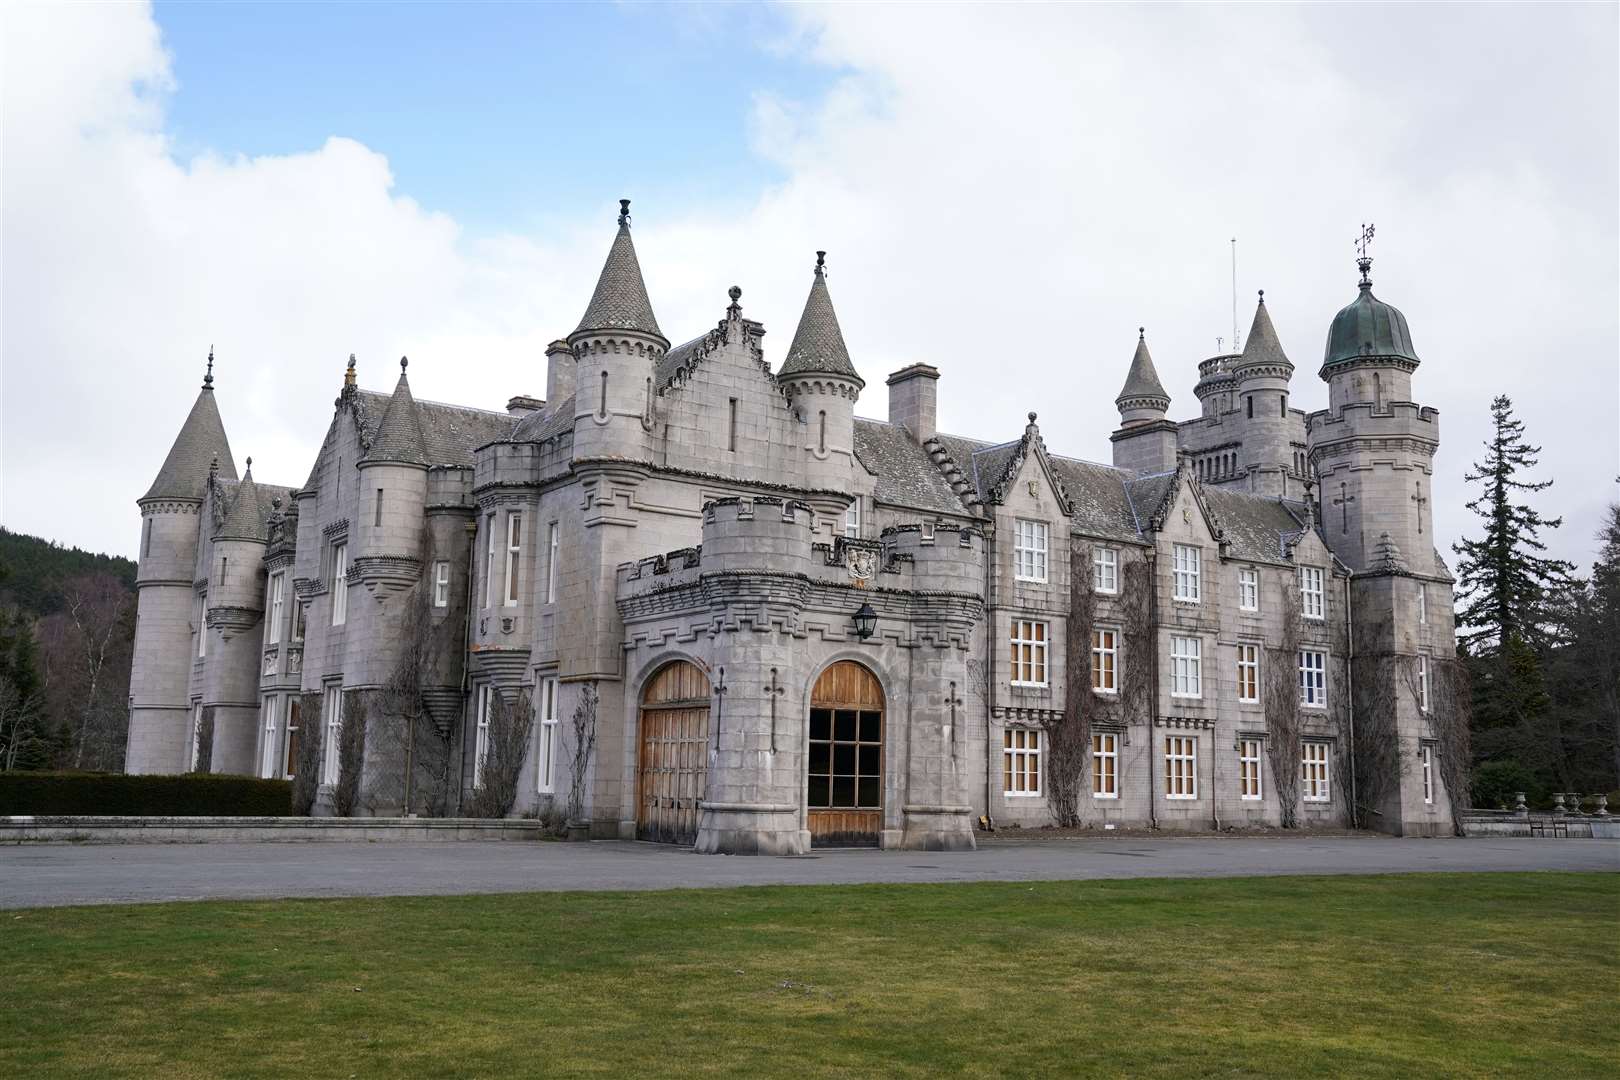 The King’s private Balmoral Castle residence in Scotland (Andrew Milligan/PA)